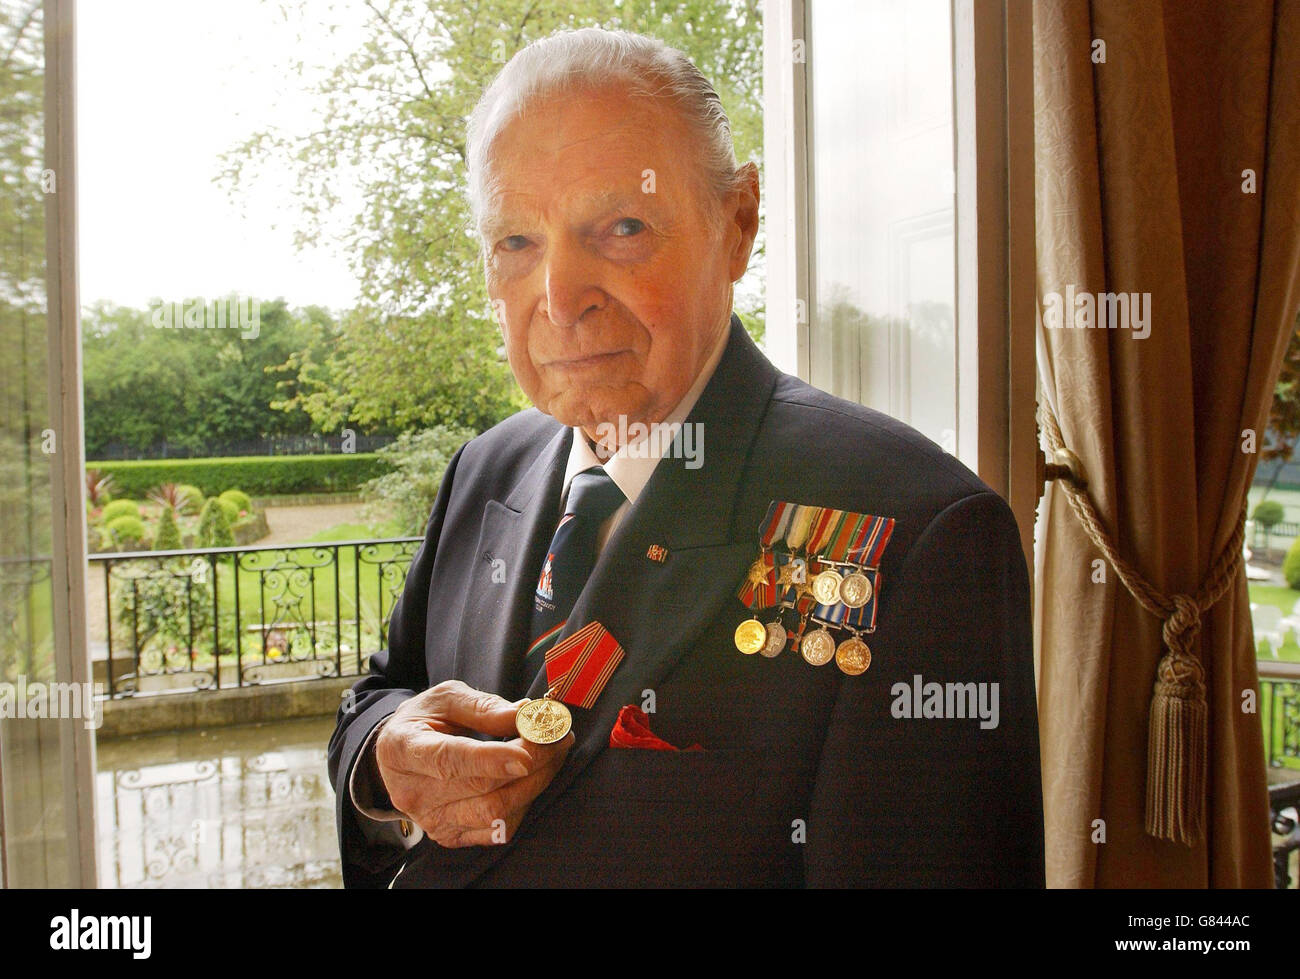 Commander Eddie Grenfell, a survivor of the Artic Convoys of 1941-45 at the Russian Embassy in London where he received a commemorative medal from the Russian Ambassador, Gregory Karasin, marking the 60th anniversary of the end of what Russians term the 'Great Patriotic War'. Stock Photo